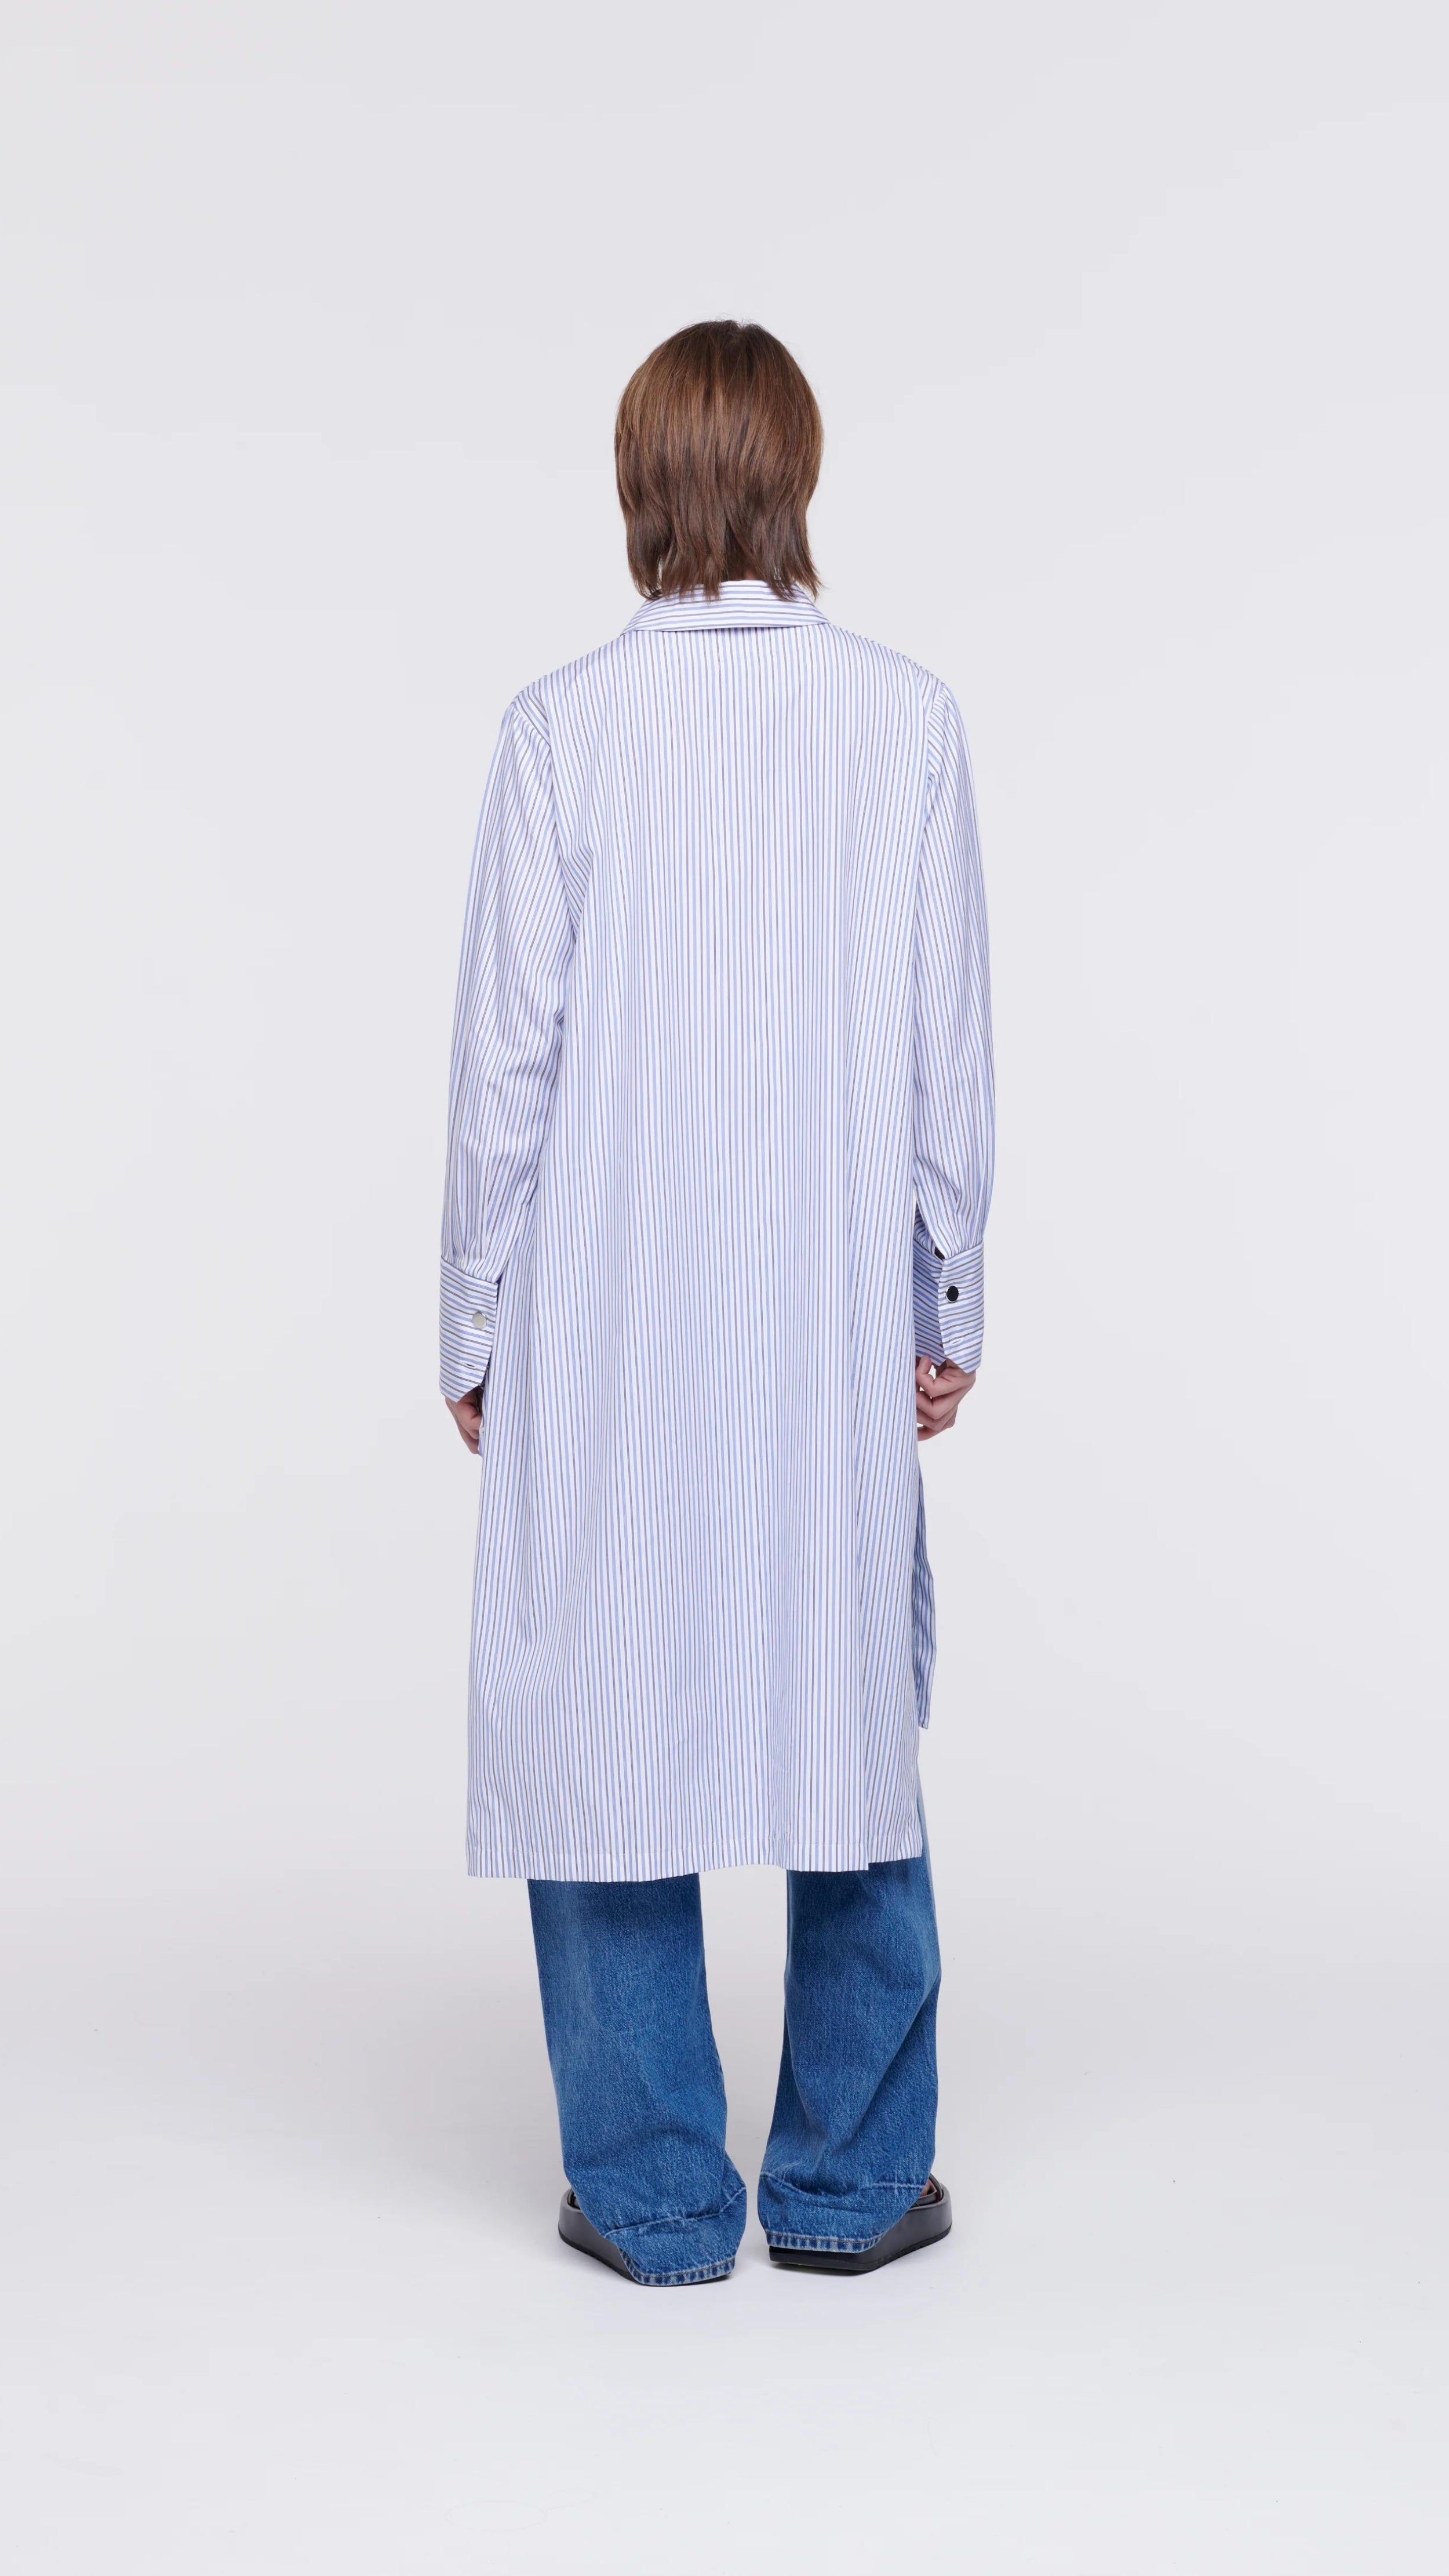 Plan C Striped Cotton Poplin Shirt Dress Classic yet modern shirt dress made from soft cotton poplin in pale blue and white stripes. It has three silver buttons, a collared neckline, long cuffs, and a breast pocket. It's designed with a relaxed fit and side pockets. Shown on model facing back